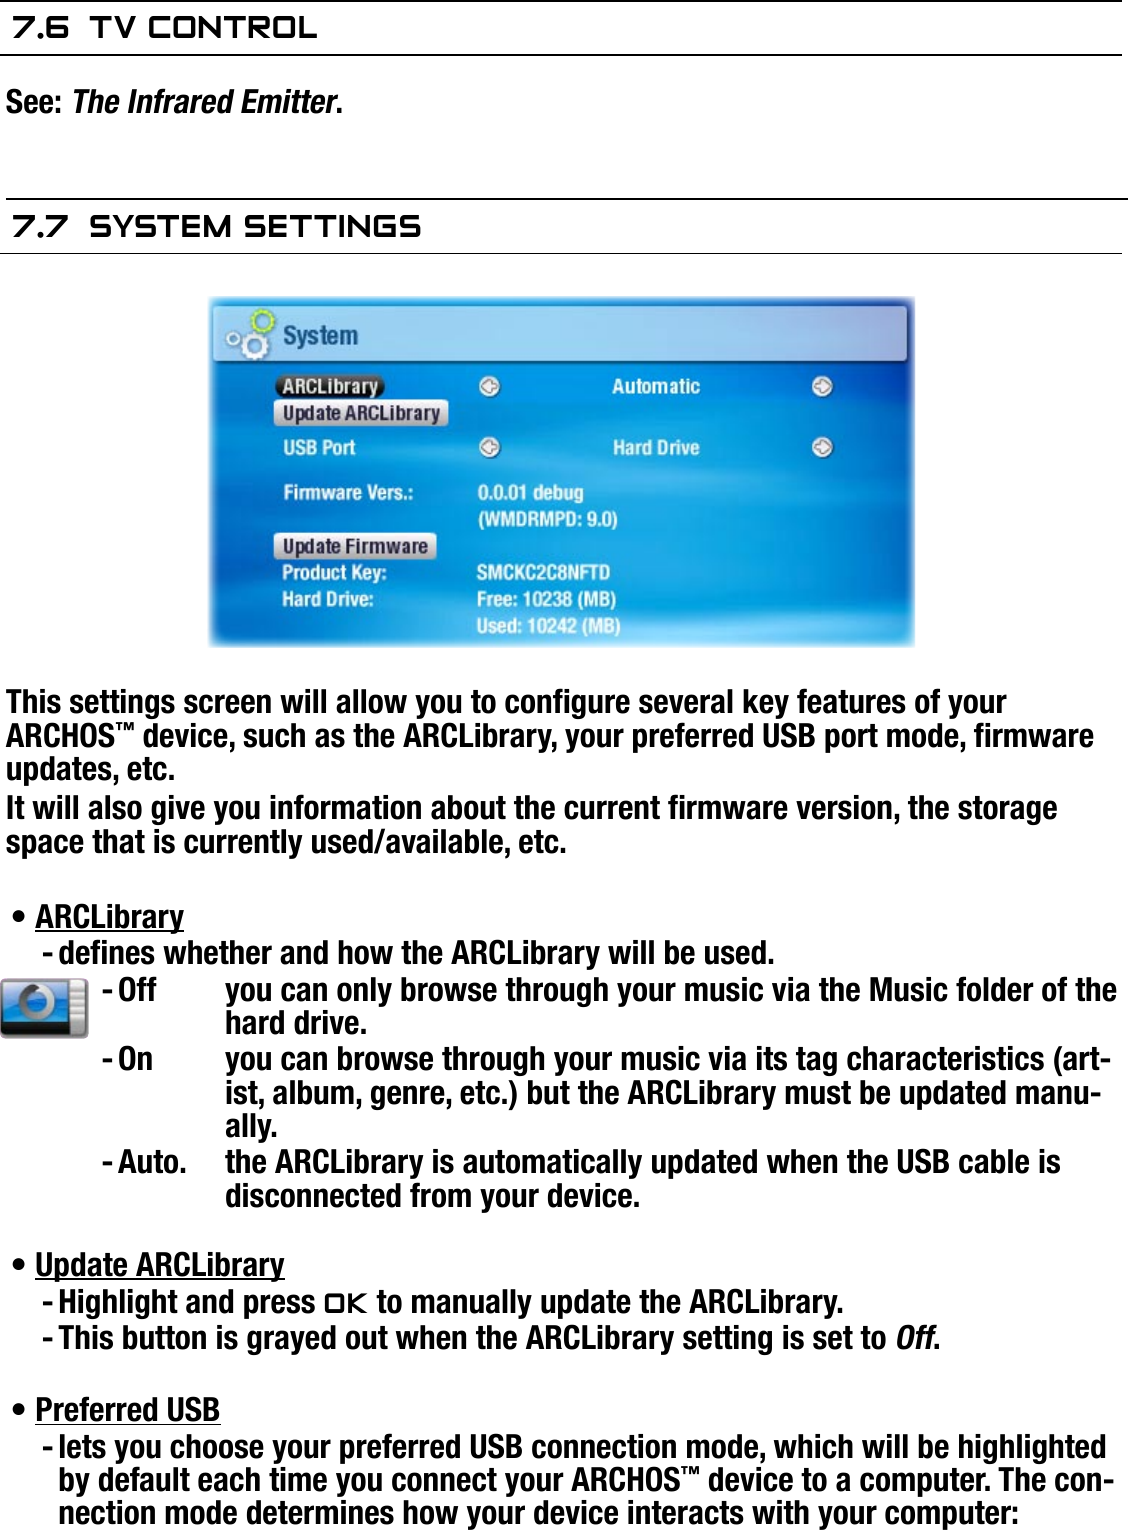 504/604MANUAL V2.0SETUP SCREEN   &gt;   p. 447.6  TV COnTrOlSee: The Infrared Emitter.7.7  sysTeM seTTIngsThis settings screen will allow you to congure several key features of your ARCHOS™ device, such as the ARCLibrary, your preferred USB port mode, rmware updates, etc.It will also give you information about the current rmware version, the storage space that is currently used/available, etc.ARCLibrarydenes whether and how the ARCLibrary will be used.Off  you can only browse through your music via the Music folder of the hard drive.On  you can browse through your music via its tag characteristics (art-ist, album, genre, etc.) but the ARCLibrary must be updated manu-ally.Auto.  the ARCLibrary is automatically updated when the USB cable is disconnected from your device.Update ARCLibraryHighlight and press OK to manually update the ARCLibrary.This button is grayed out when the ARCLibrary setting is set to Off.Preferred USBlets you choose your preferred USB connection mode, which will be highlighted by default each time you connect your ARCHOS™ device to a computer. The con-nection mode determines how your device interacts with your computer:•----•--•-